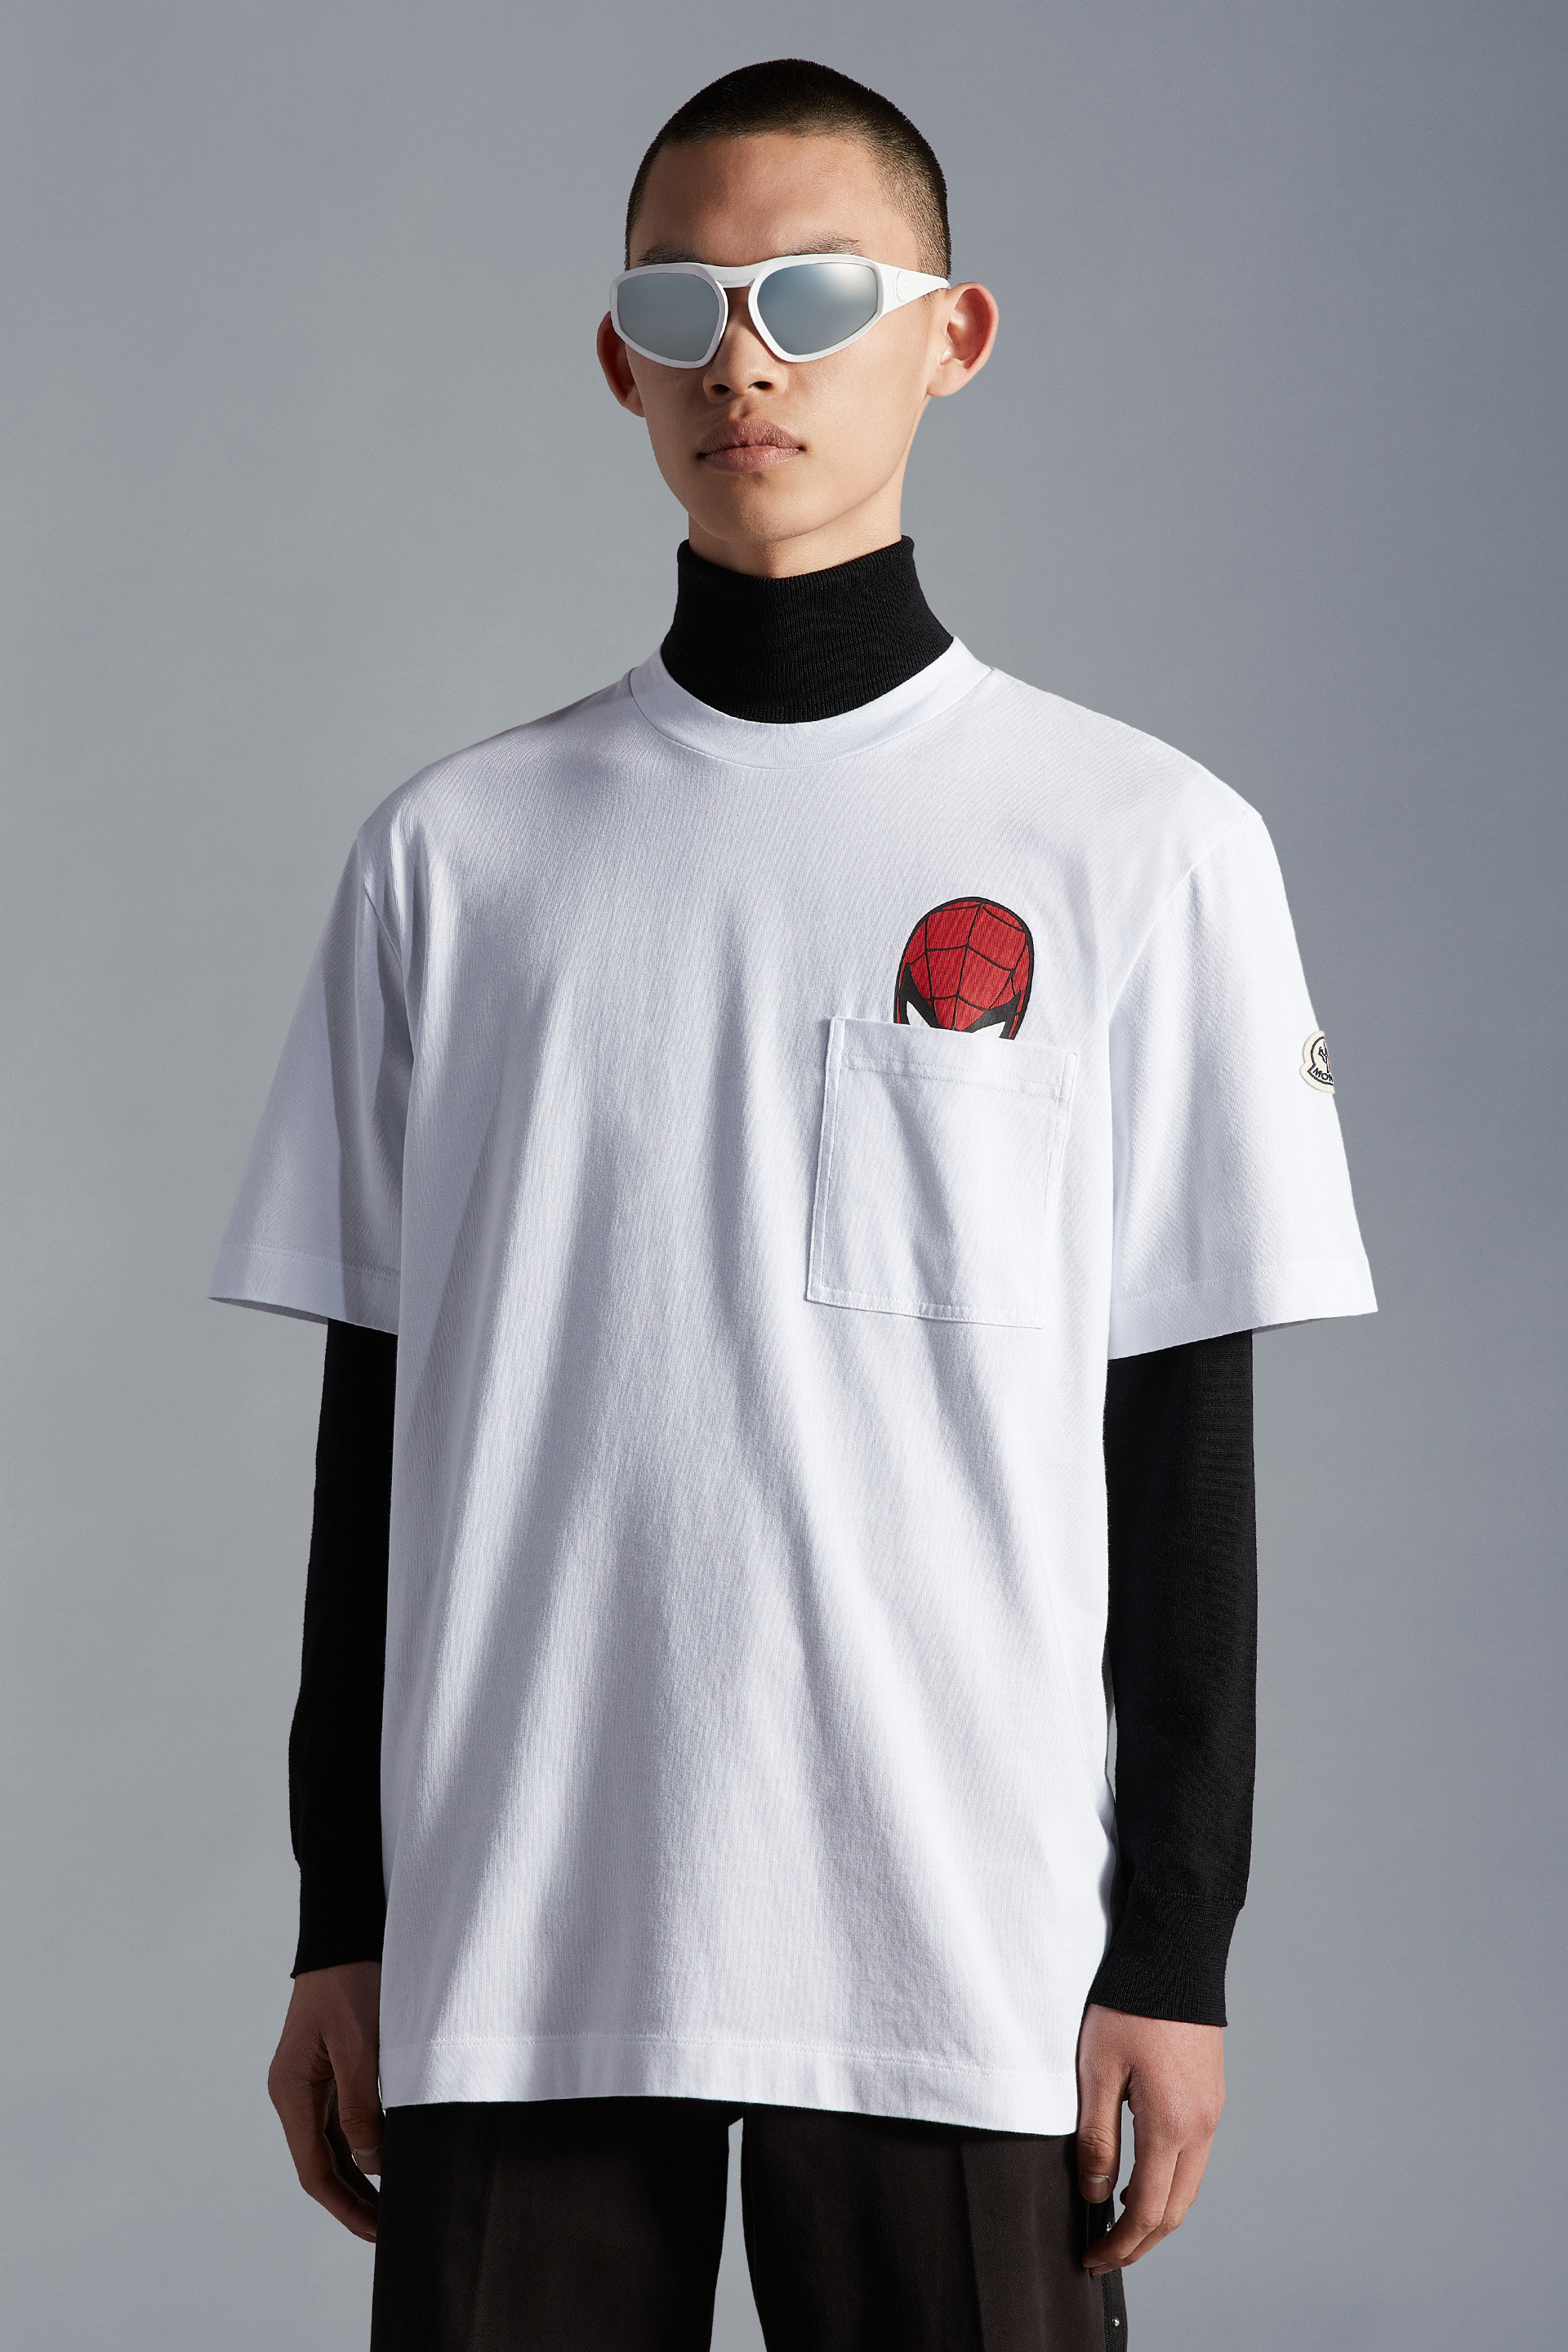 【Moncler】モンクレール スパイダーマン Tシャツ 4A/5A/6A - icaten.gob.mx